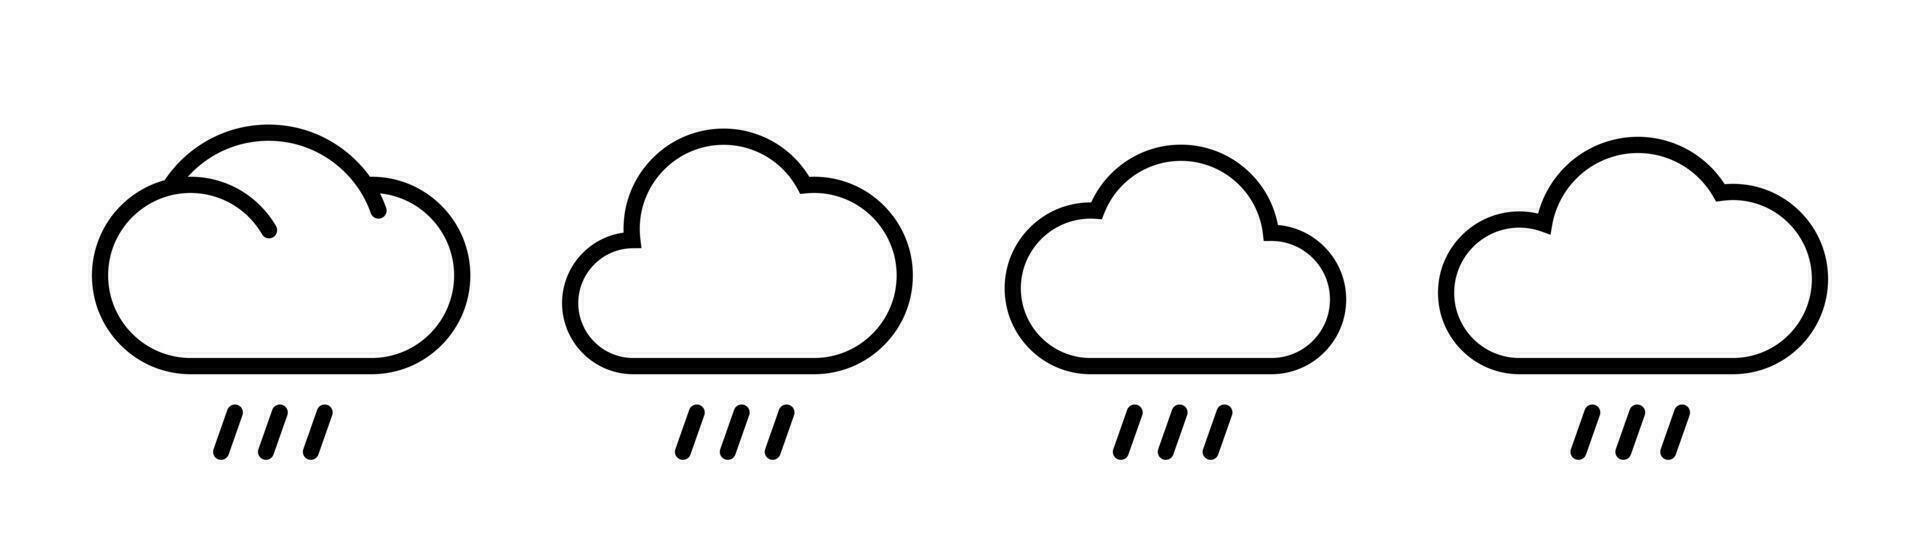 Rain icon set. Cloud with rain icon. Outline rain symbol. Linear cloud set. Weather sign in line. Cloud vector sign. Stock vector illustration